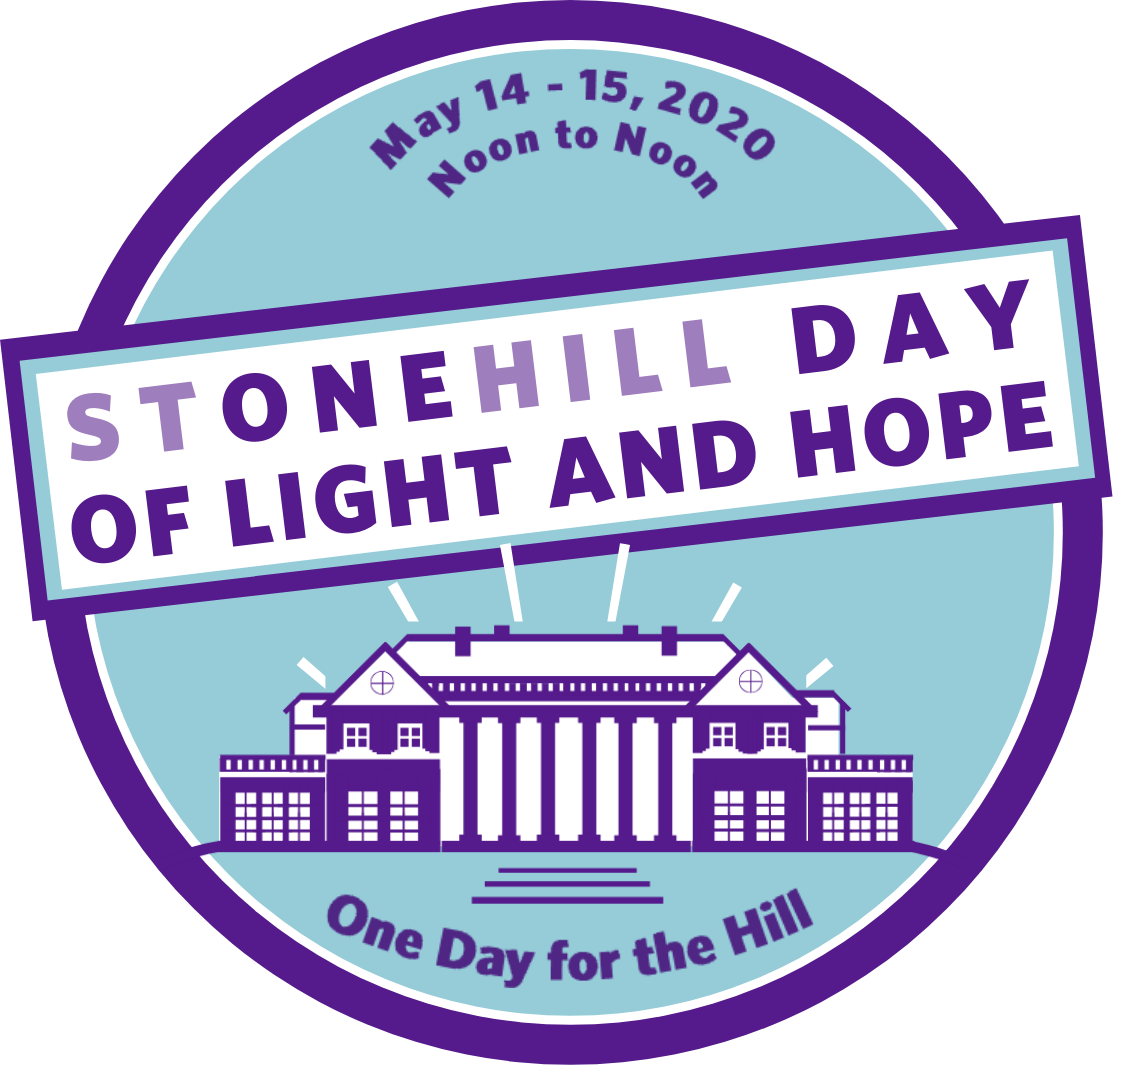 Stonehill Day of Light and Hope